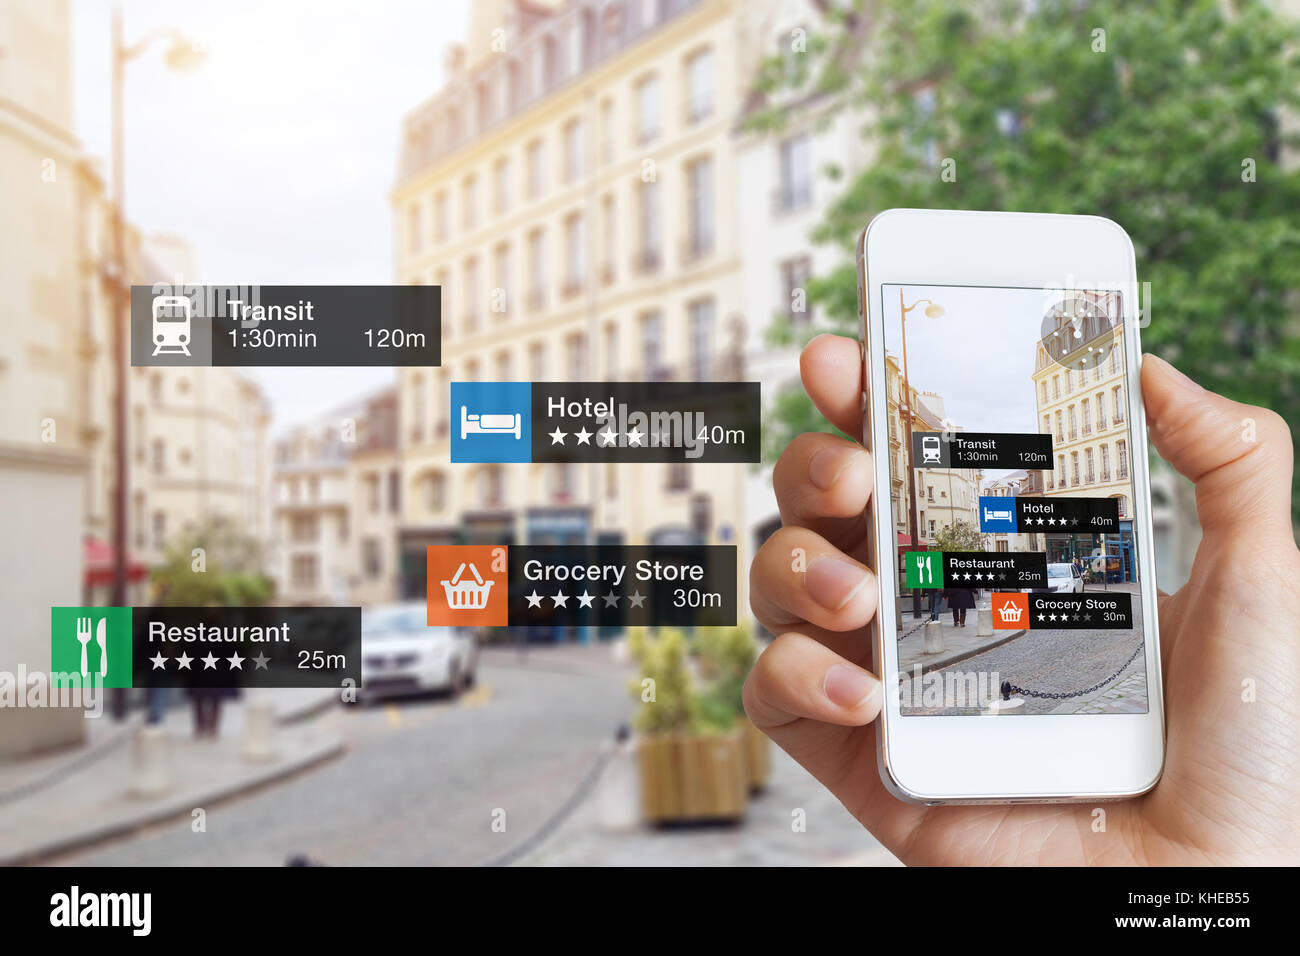 Augmented Reality (AR) information technology about nearby businesses and services on smartphone screen guide customer or tourist in the city, close-u Stock Photo